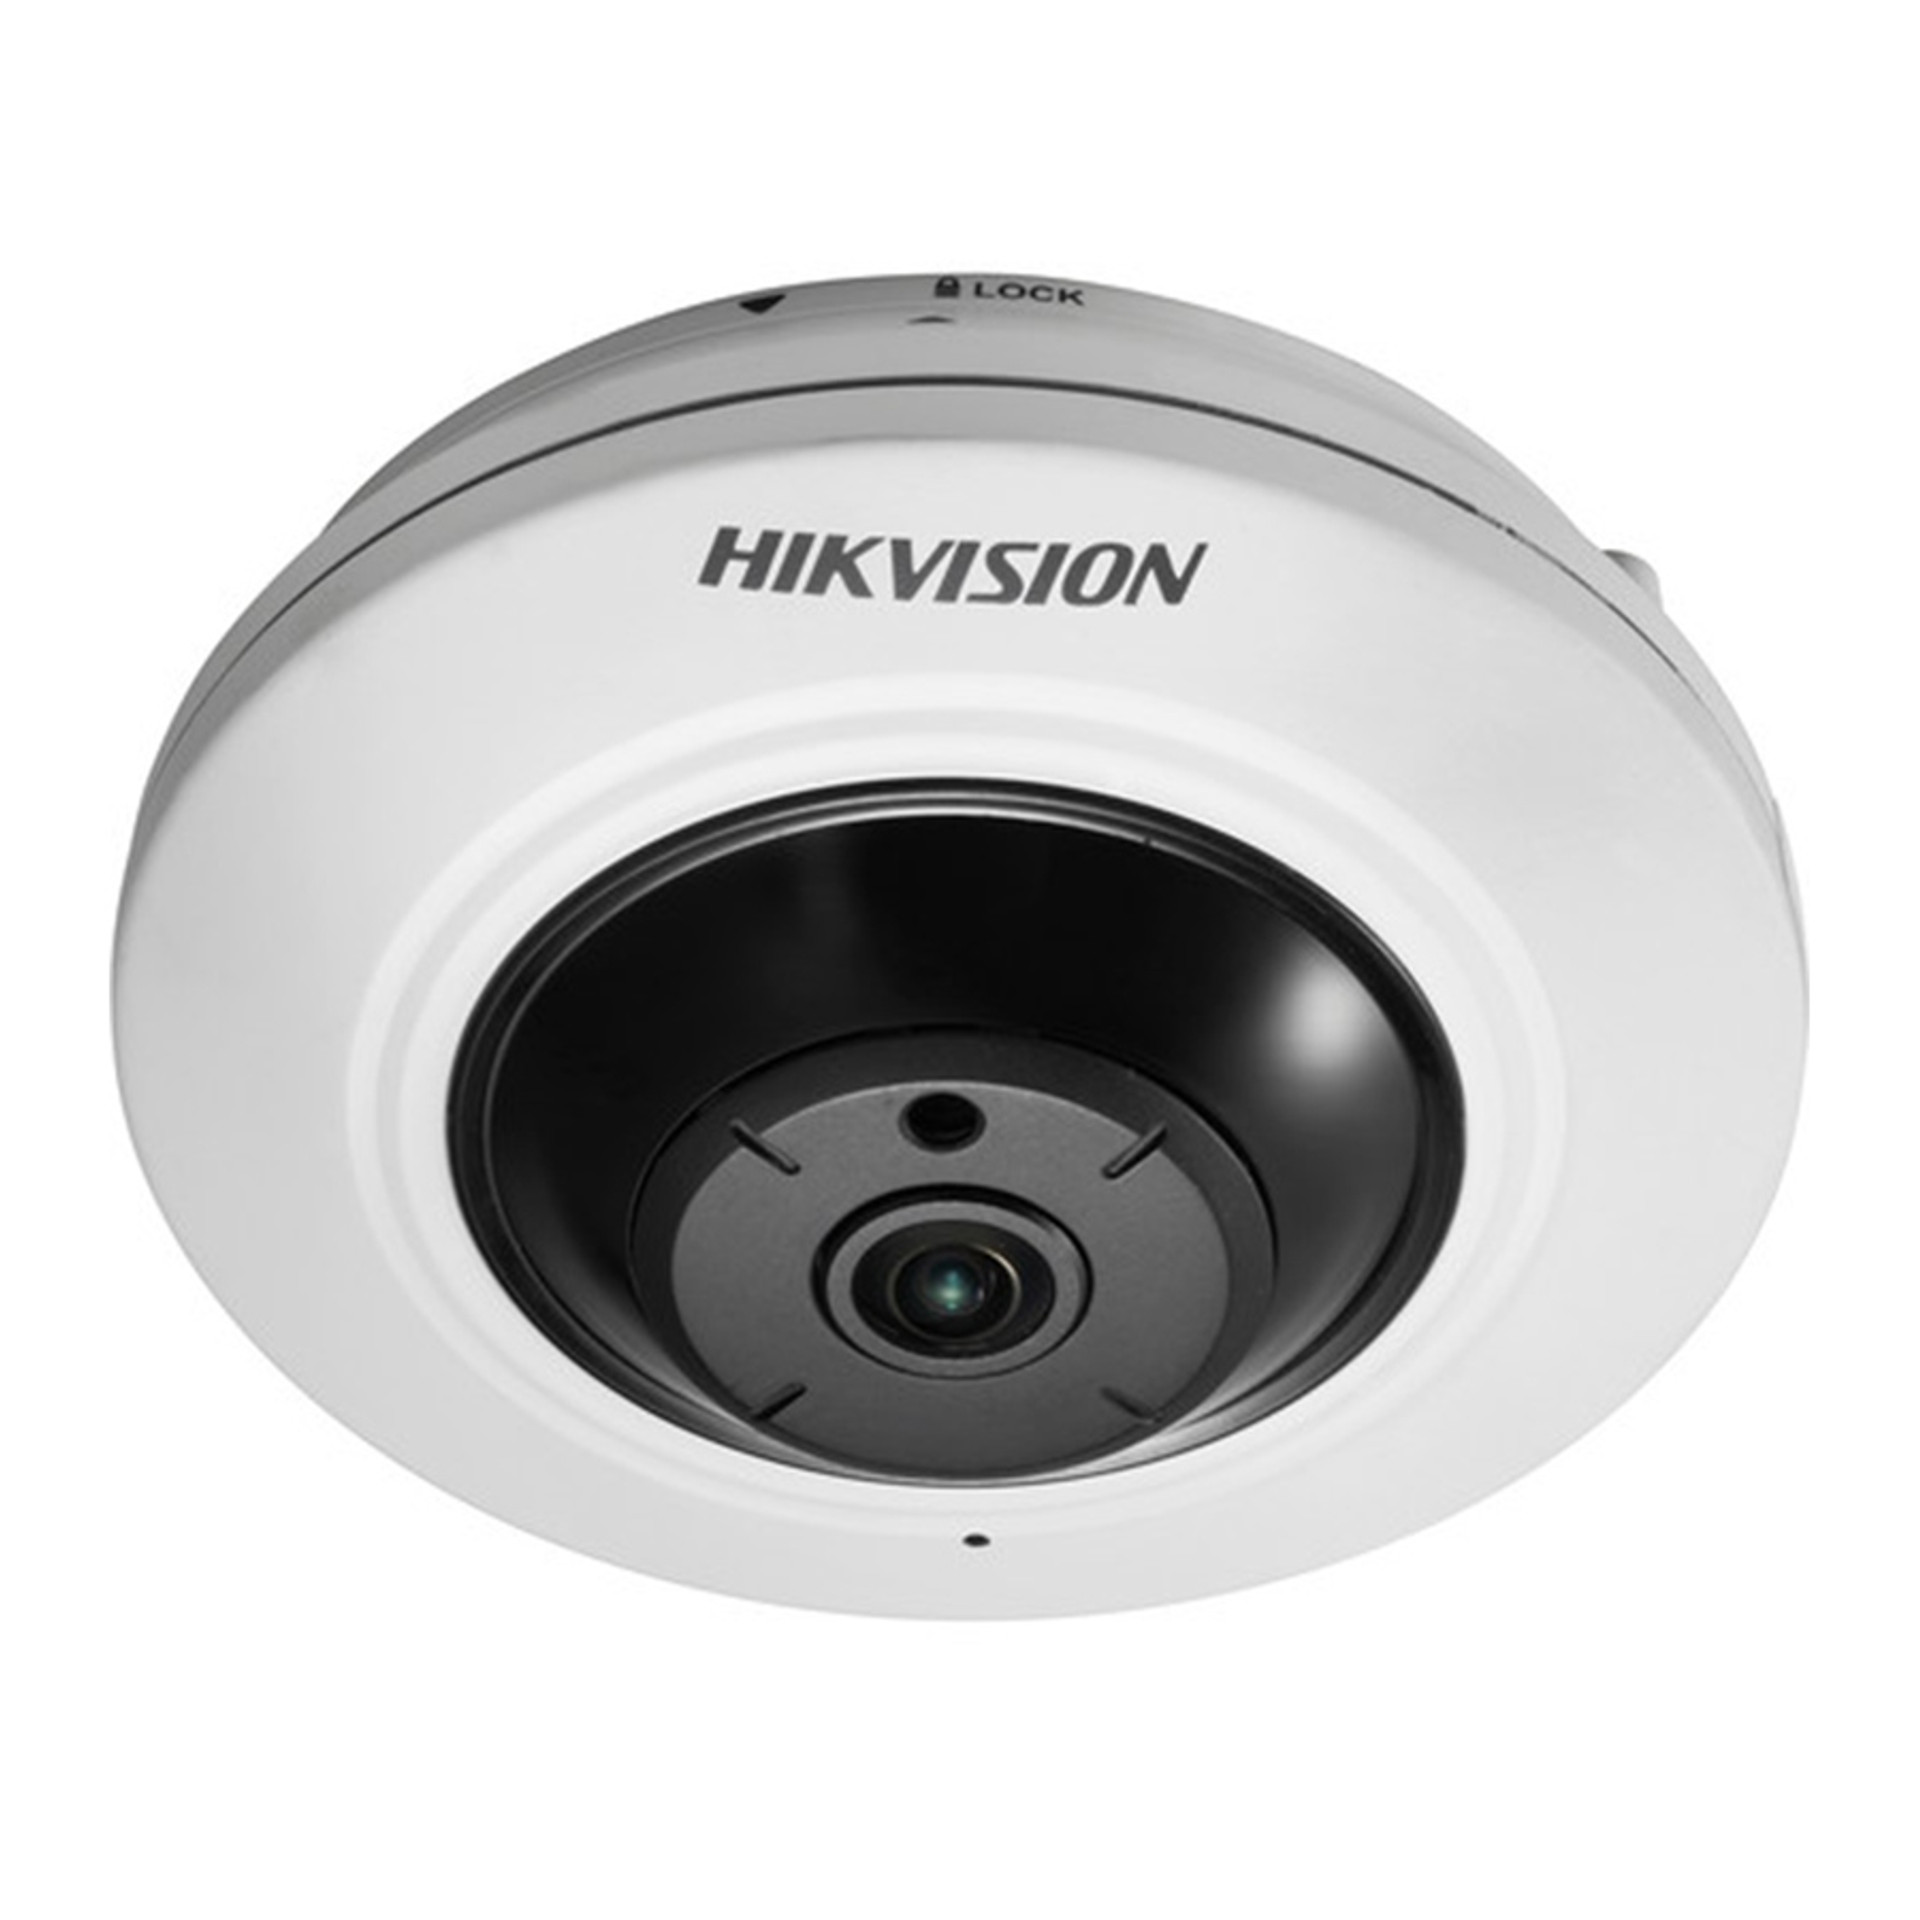 Hikvision DS-2CE56H0T-AITZF 5MP Indoor Dome CCTV Analog Security Camera